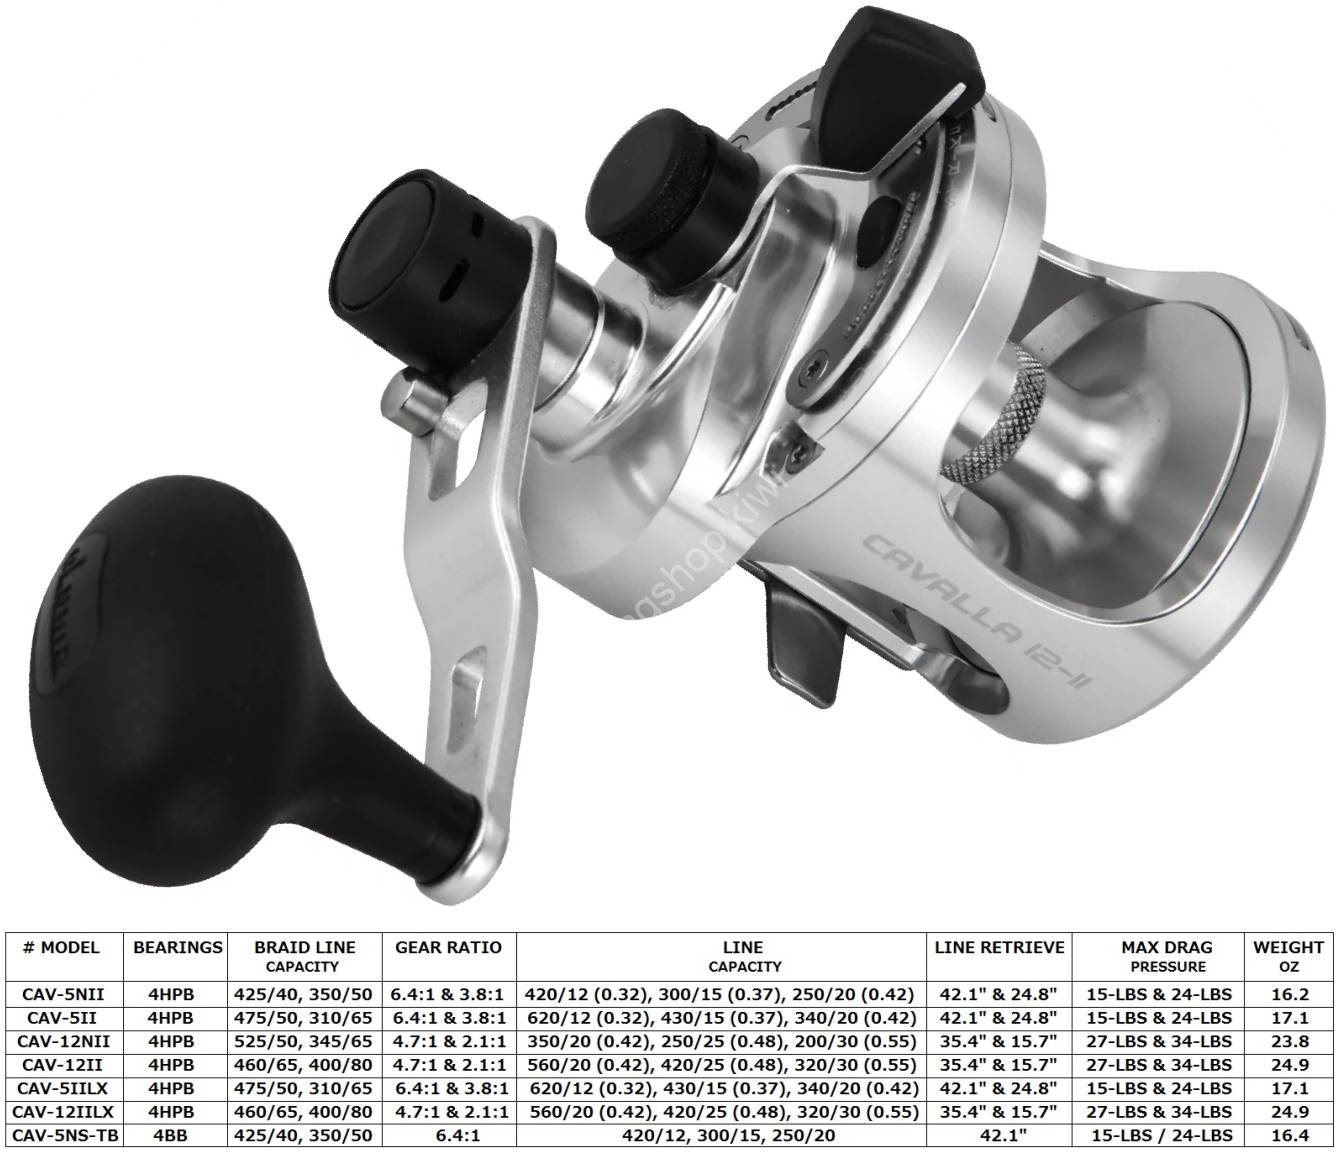 CAVALLA 2 SPEED OKUMA Fishing Shopping - The portal for fishing tailored  for you